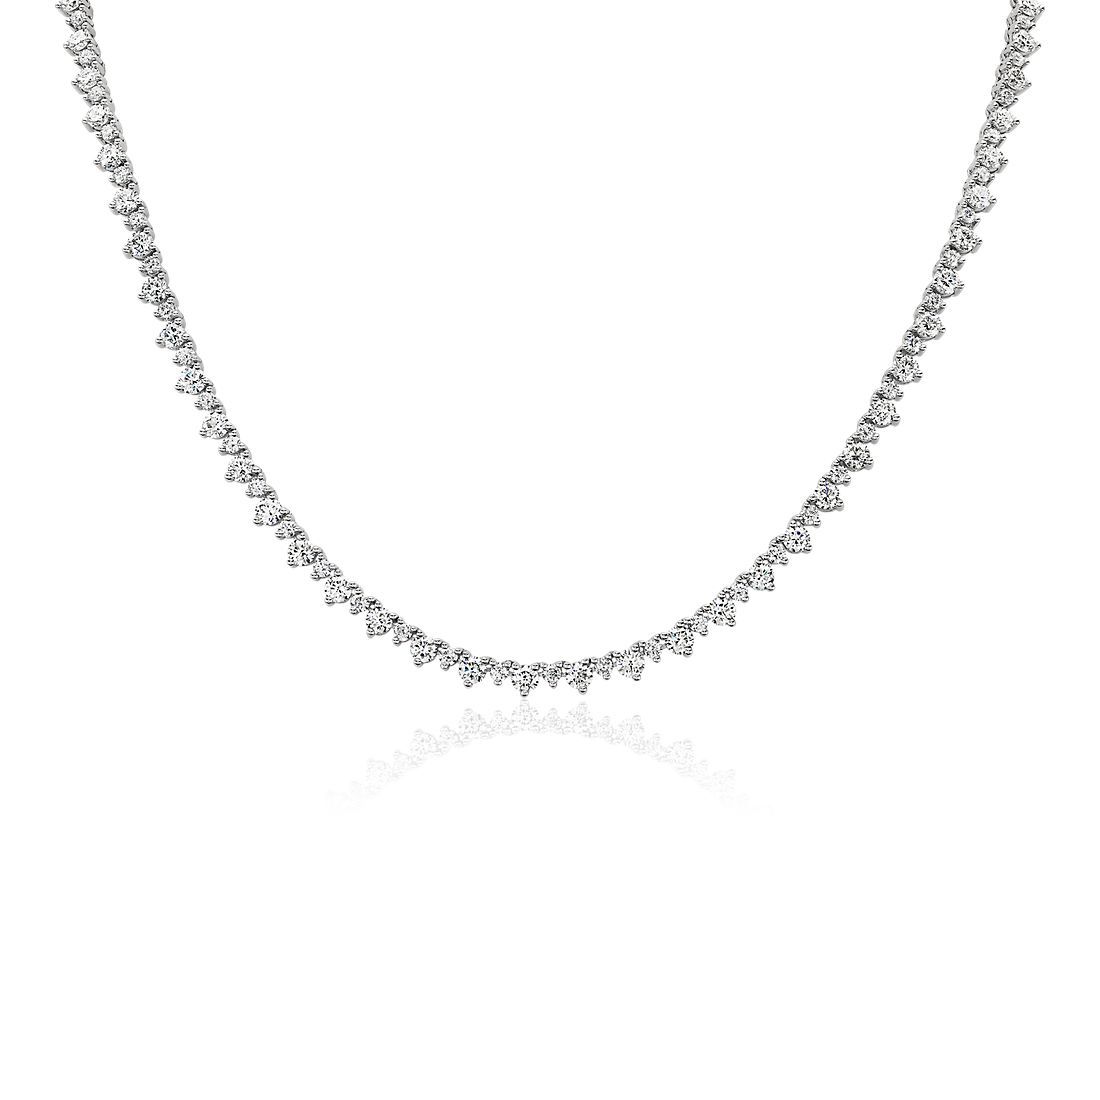 Alternating Size Eternity Necklace in 14k White Gold (10 ct. tw.) | Blue Nile | Blue Nile